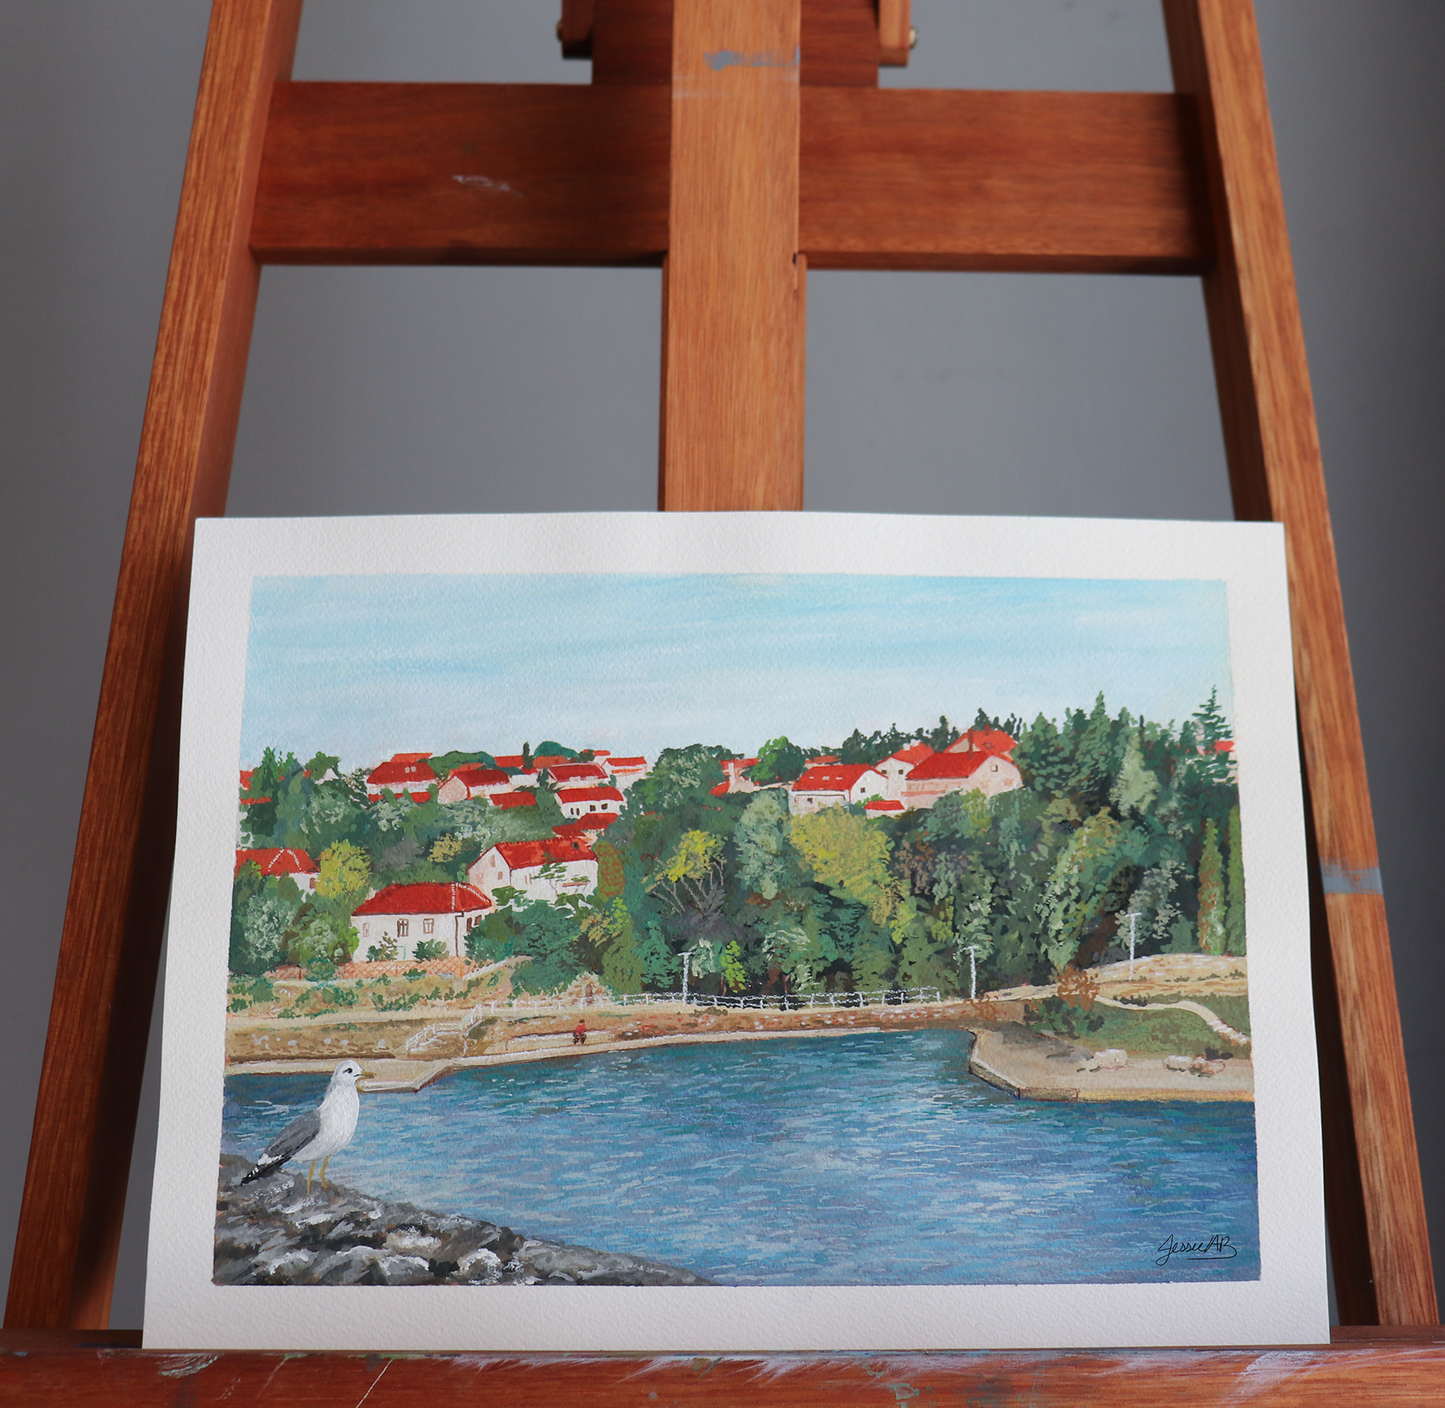 Original painting on my easel named "Villager's Heart" in natural lighting